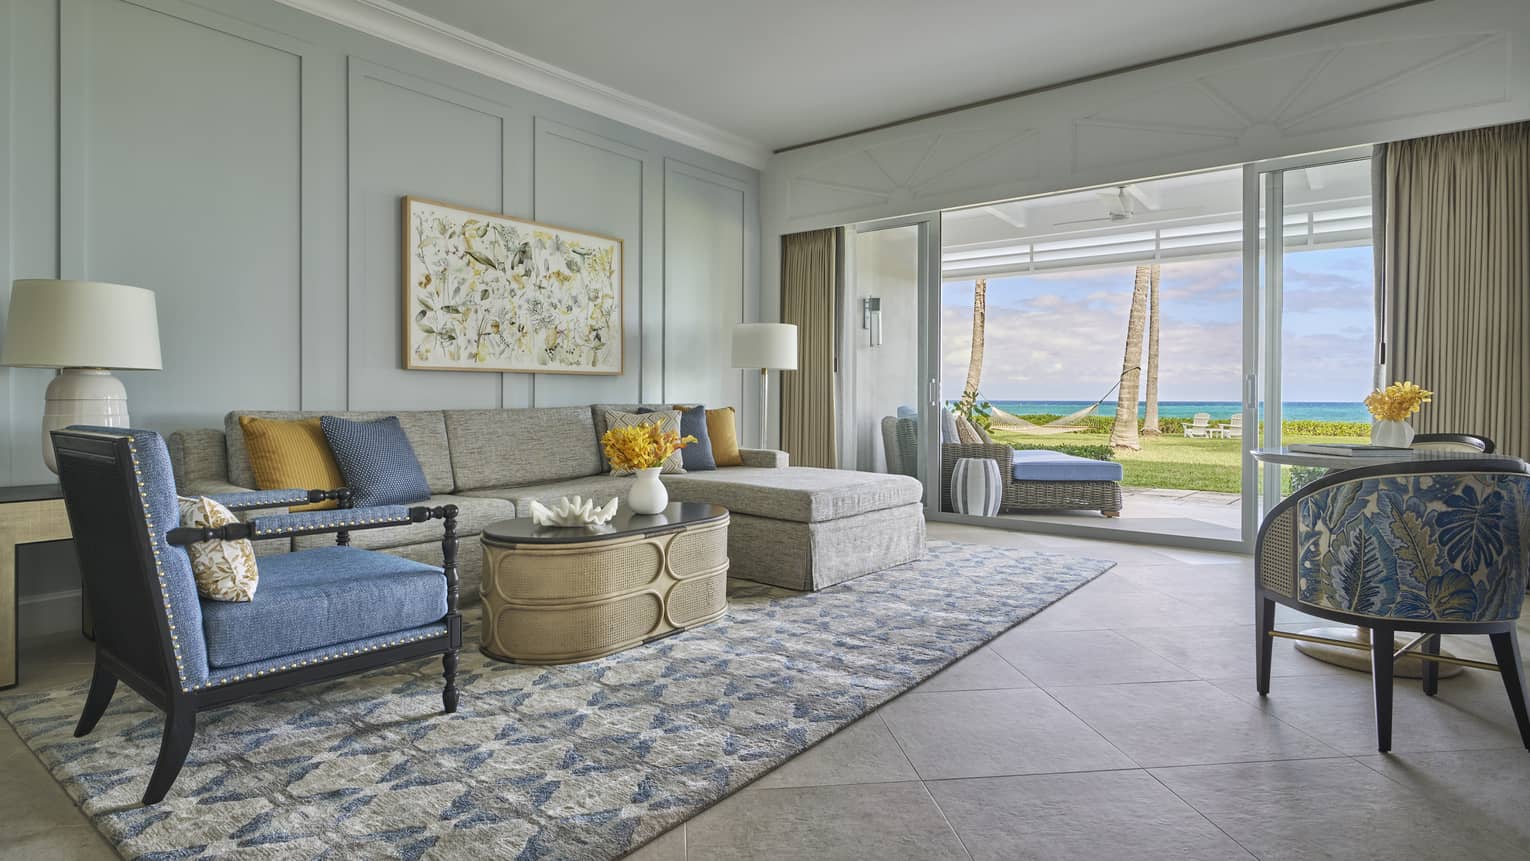 Living room with sofa, blue arm chair, rug, walk-out ocean-view terrace